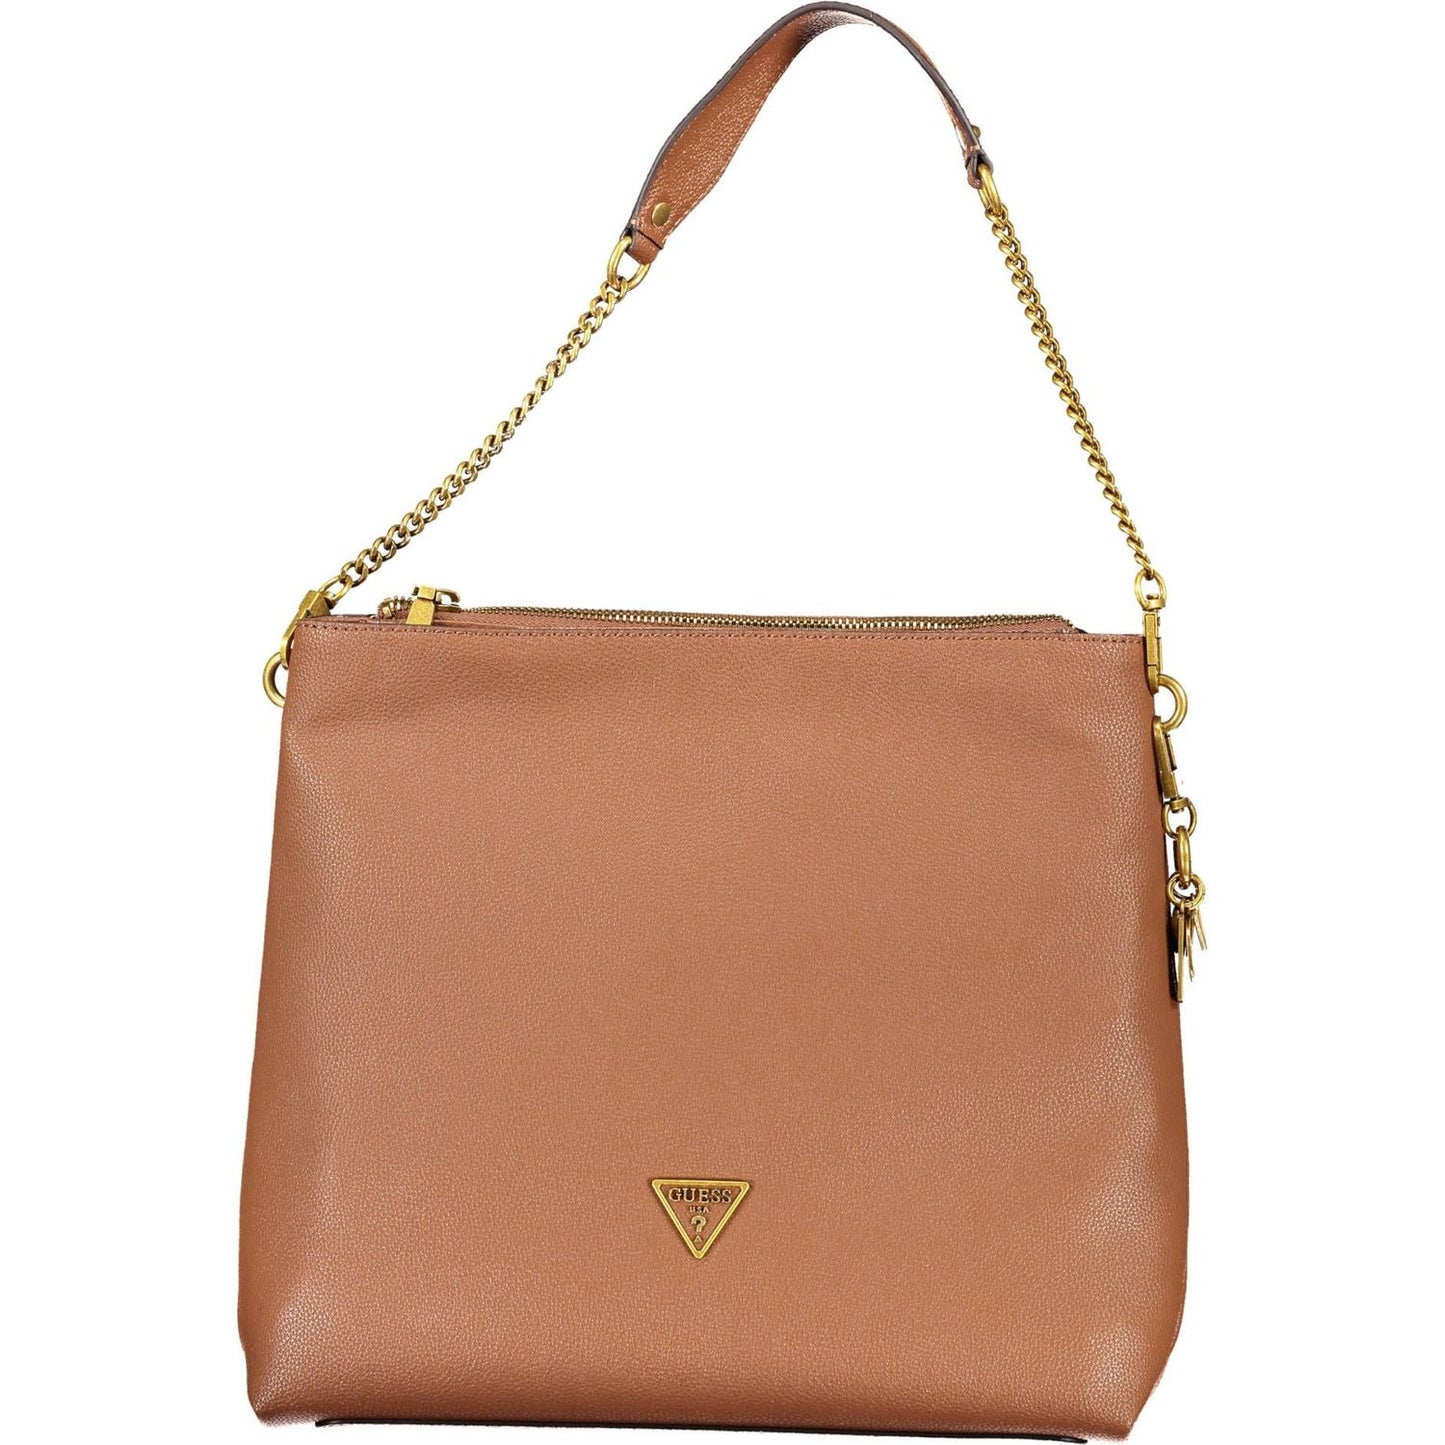 Guess Jeans Chic Brown Polyurethane Shoulder Bag chic-brown-polyurethane-shoulder-bag